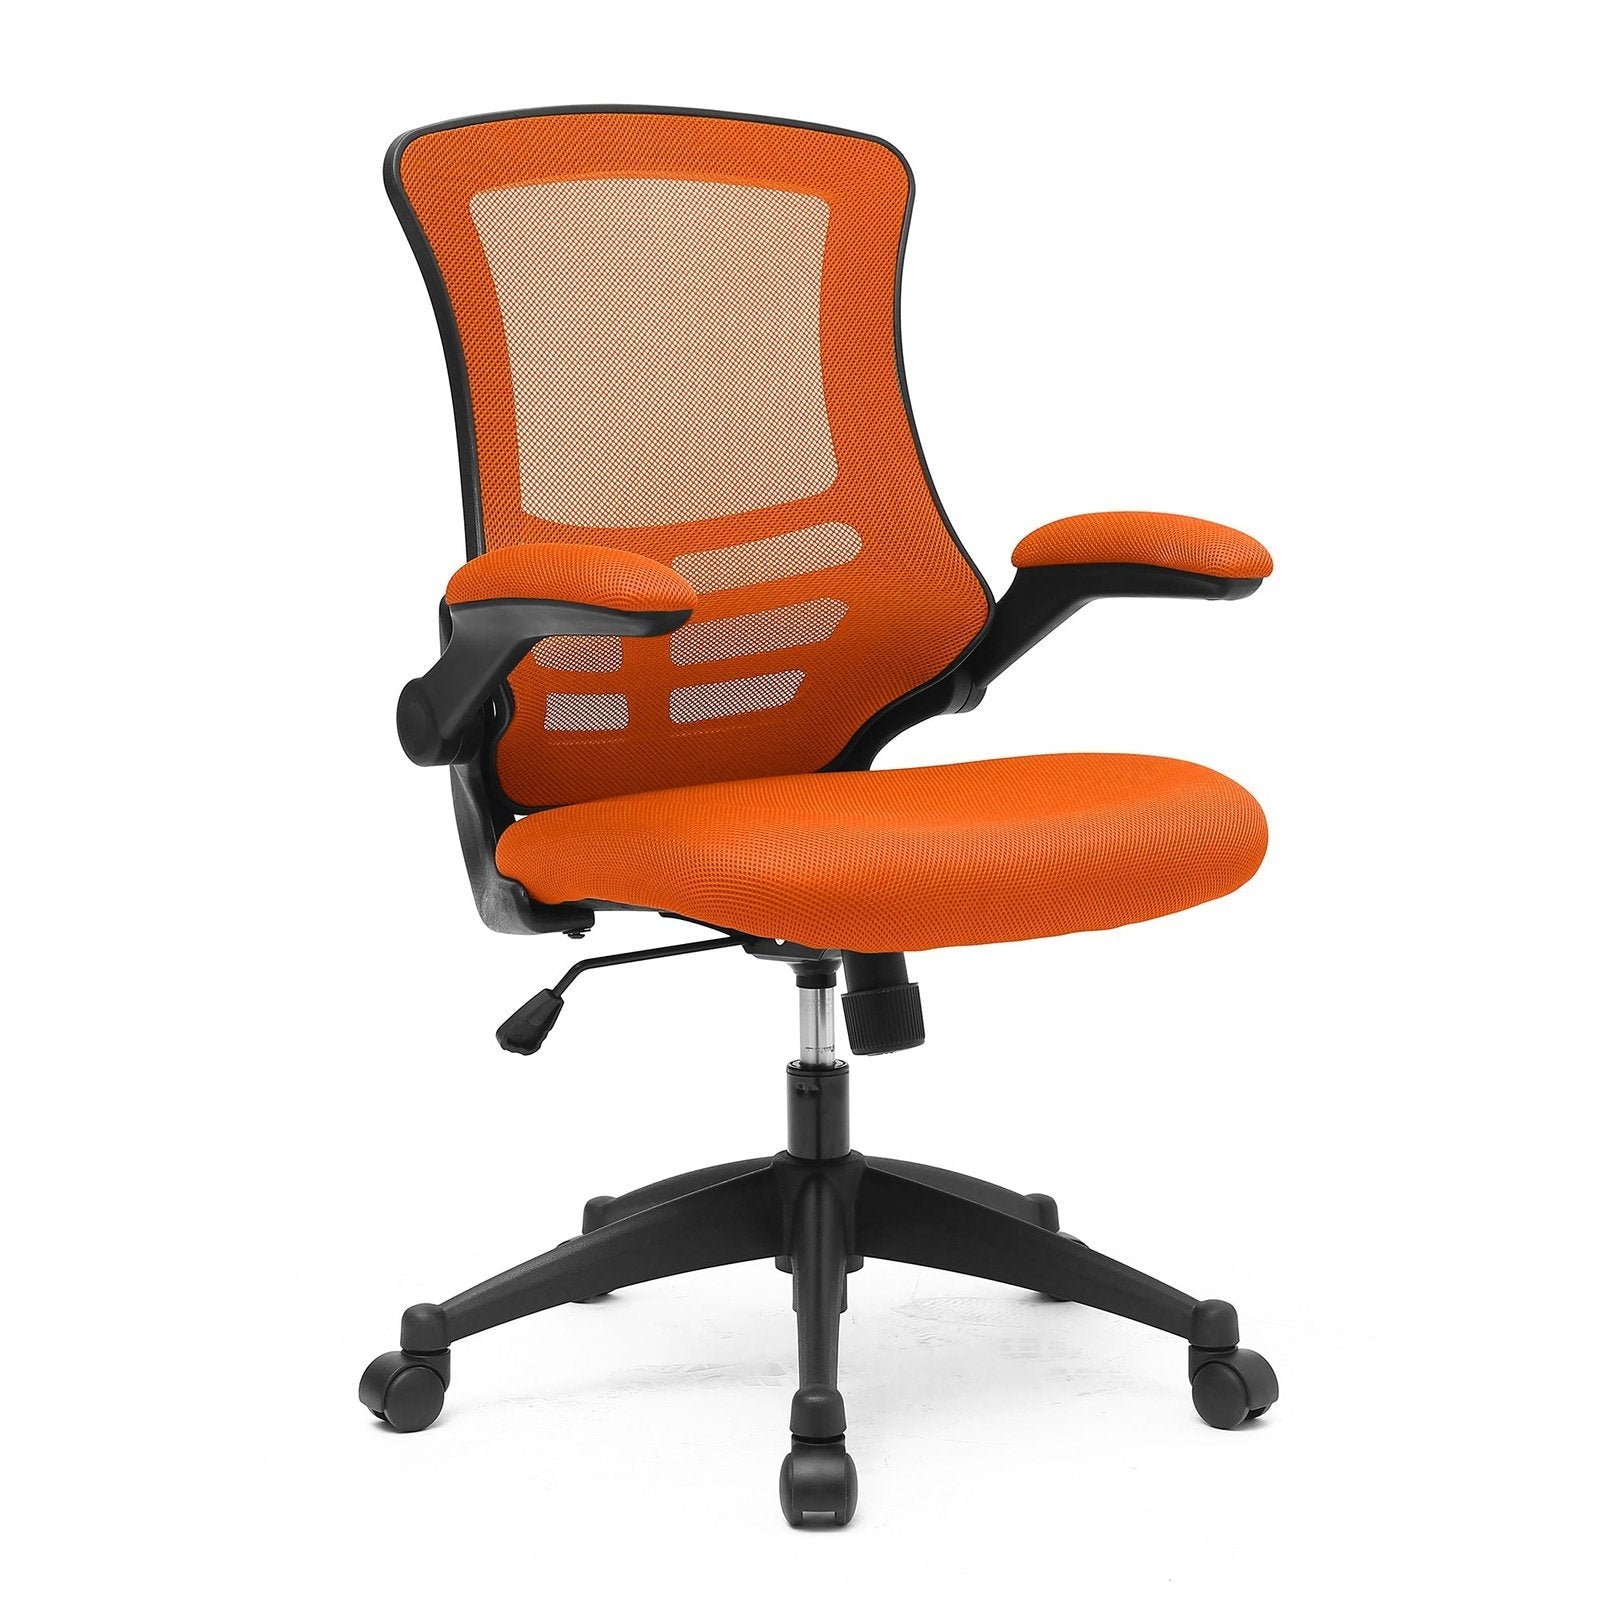 Designer Medium Back Mesh Chair with Folding Arms - Office Products Online